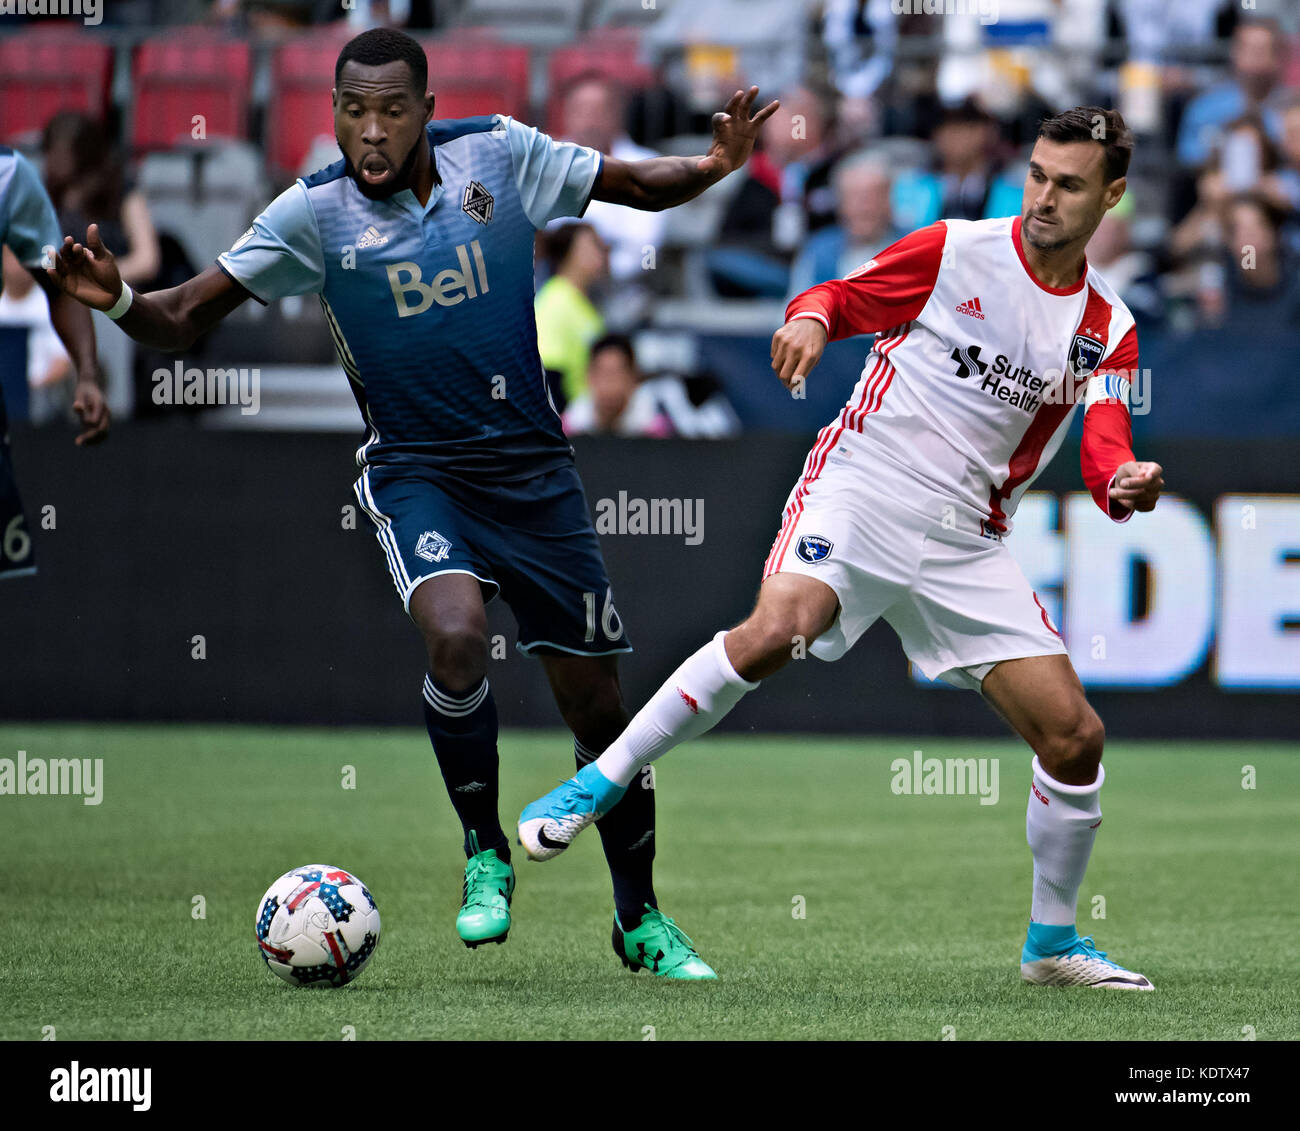 Vancouver, Canada. 15th Oct, 2017. Tony Tchani (L) of Vancouver Whitecaps vies with Chris Wondolowski of San Jose Earthquakes during the MLS regular season match between Vancouver Whitecaps and San Jose Earthquakes at BC Place Stadium in Vancouver, Canada, on Oct. 15, 2017. The match ended with a 1-1 draw. Credit: Andrew Soong/Xinhua/Alamy Live News Stock Photo